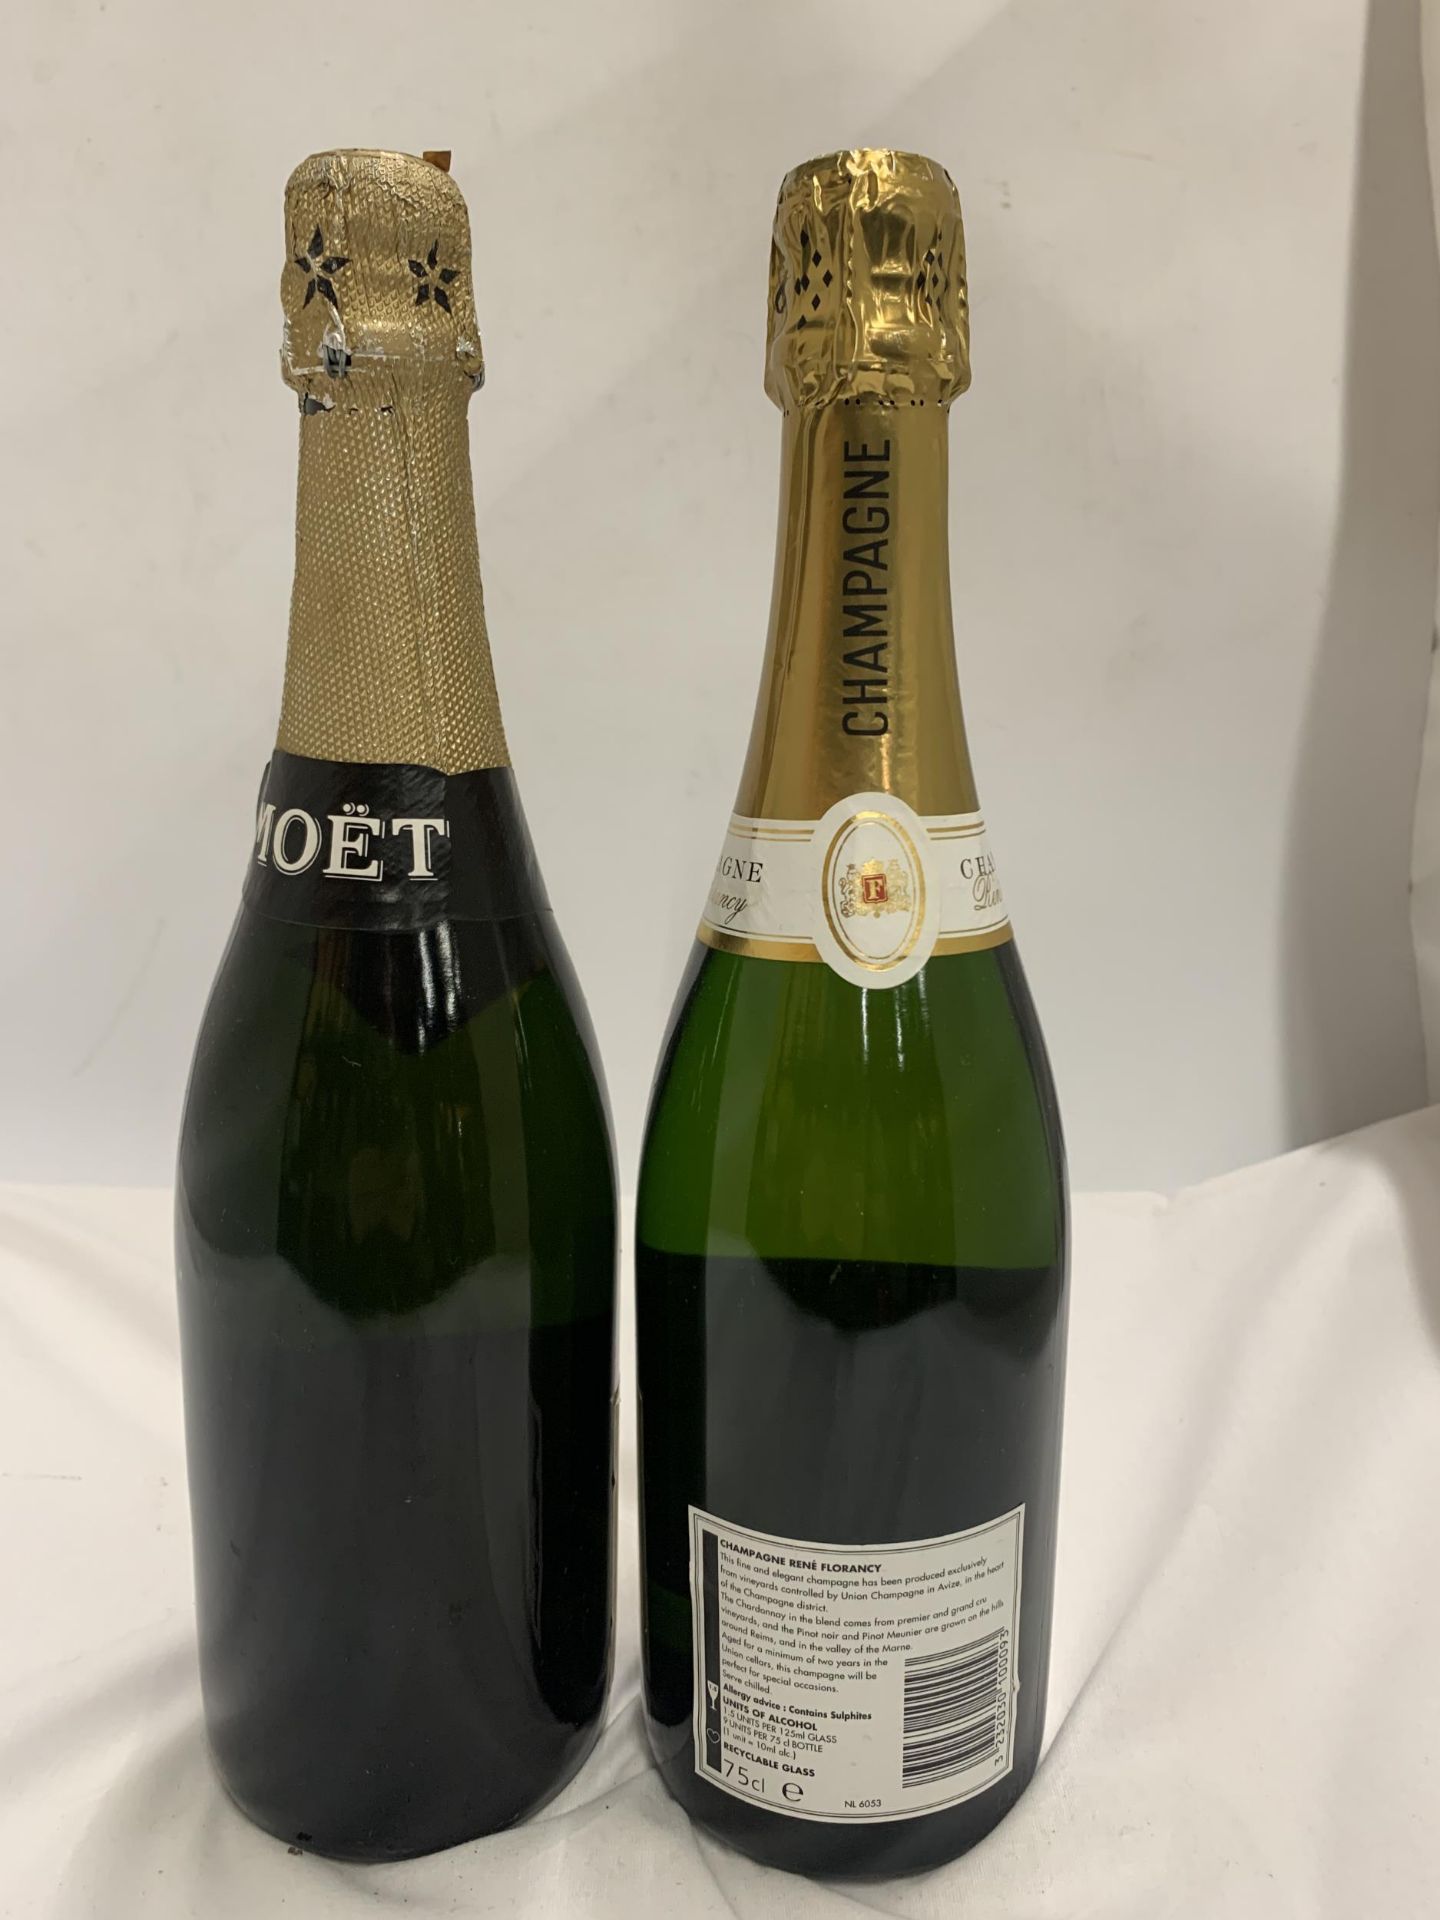 TWO 75CL BOTTLES - MOET & CHANDON PREMIERE CUVEE CAMPAGNE AND RENE FLORANCY BRUT CHAMPAGNE - Image 2 of 3